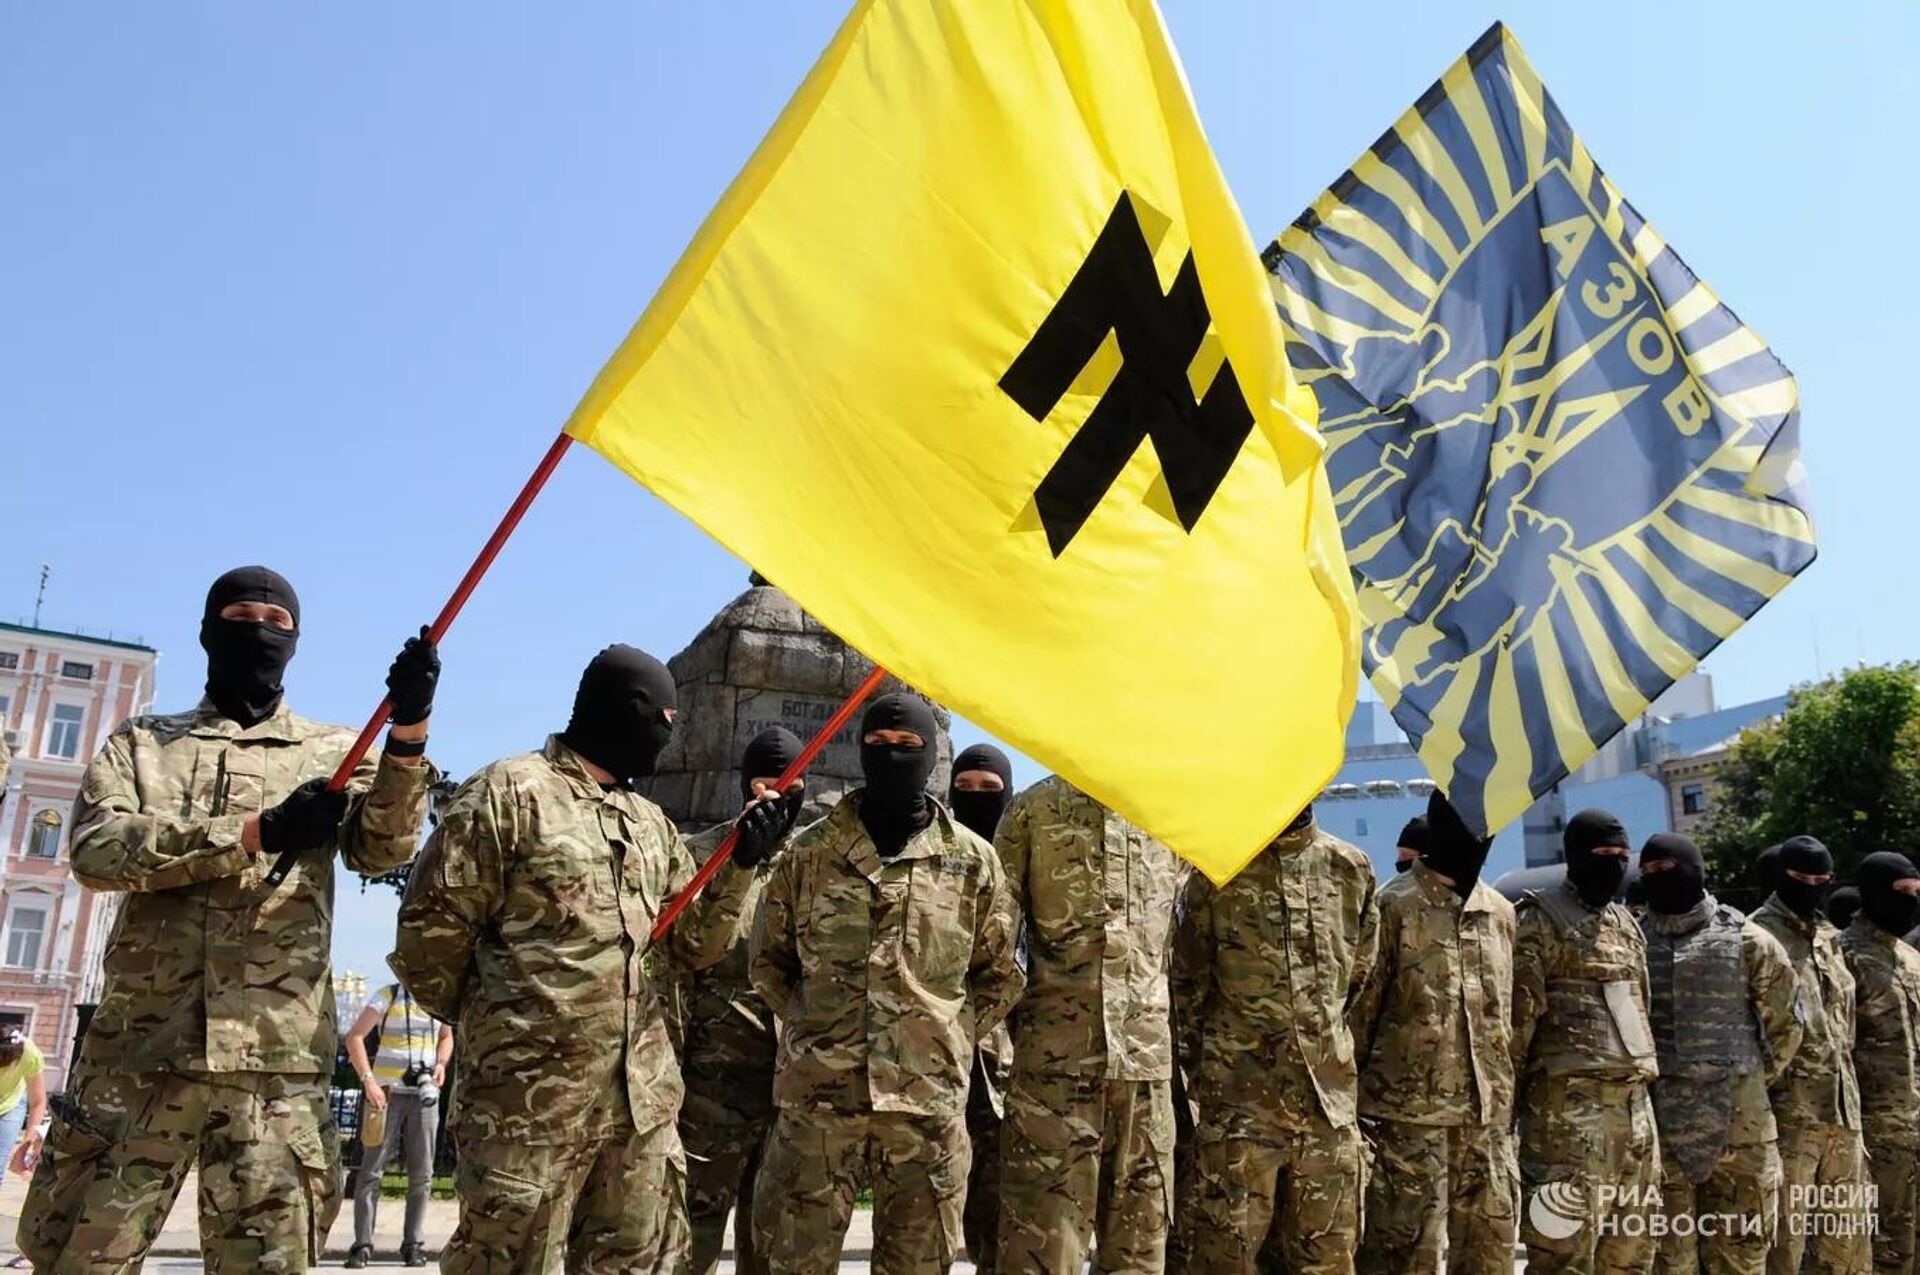 Fighters of the neo-Nazi Azov Battalion take the oath of allegiance to Ukraine in Sophia Square in Kiev before being sent to Donbass. Members of the Nazi battalion have committed hundreds of war crimes against the population of Donbass over eight years. The Azov flag has an inverted image of the runic symbol “Wolfsangel”, which was used by the Nazis. - Sputnik International, 1920, 25.07.2022